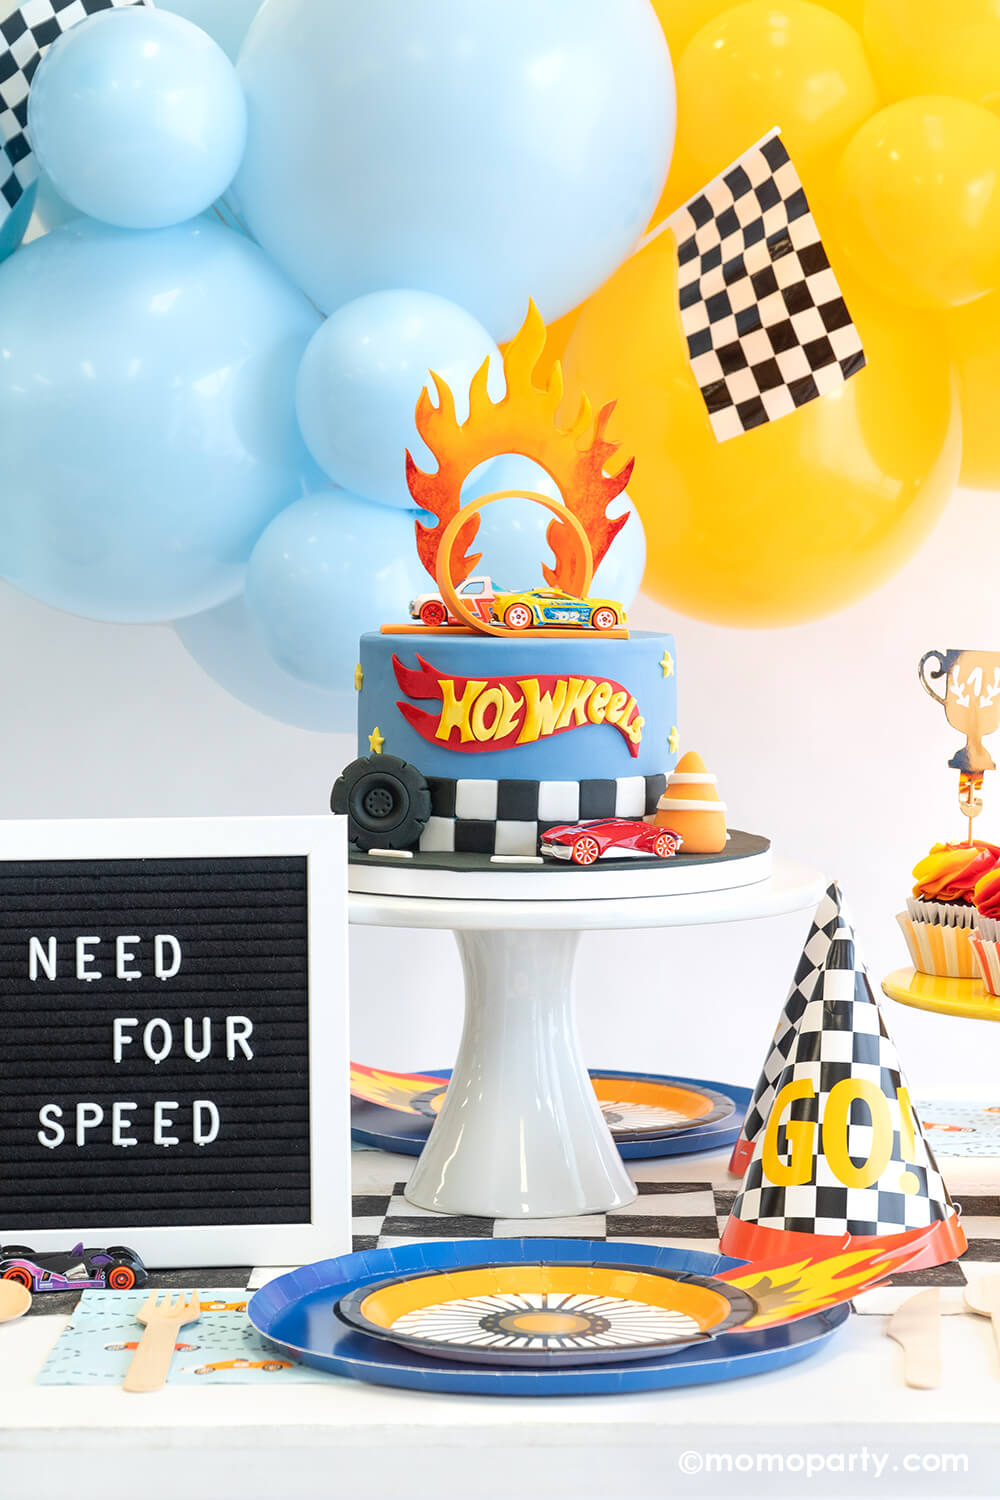 A "Need For Speed" boy's race car themed fourth birthday party featuring Hot Wheels balloon garland, Hot Wheels themed party supplies. A festive party table features Momo Party's Midnight Blue Dinner Plates, Wheel Shaped Plates, checkered party cups and checkered GO! birthday hats, with a Hot Wheels fondant birthday cake.